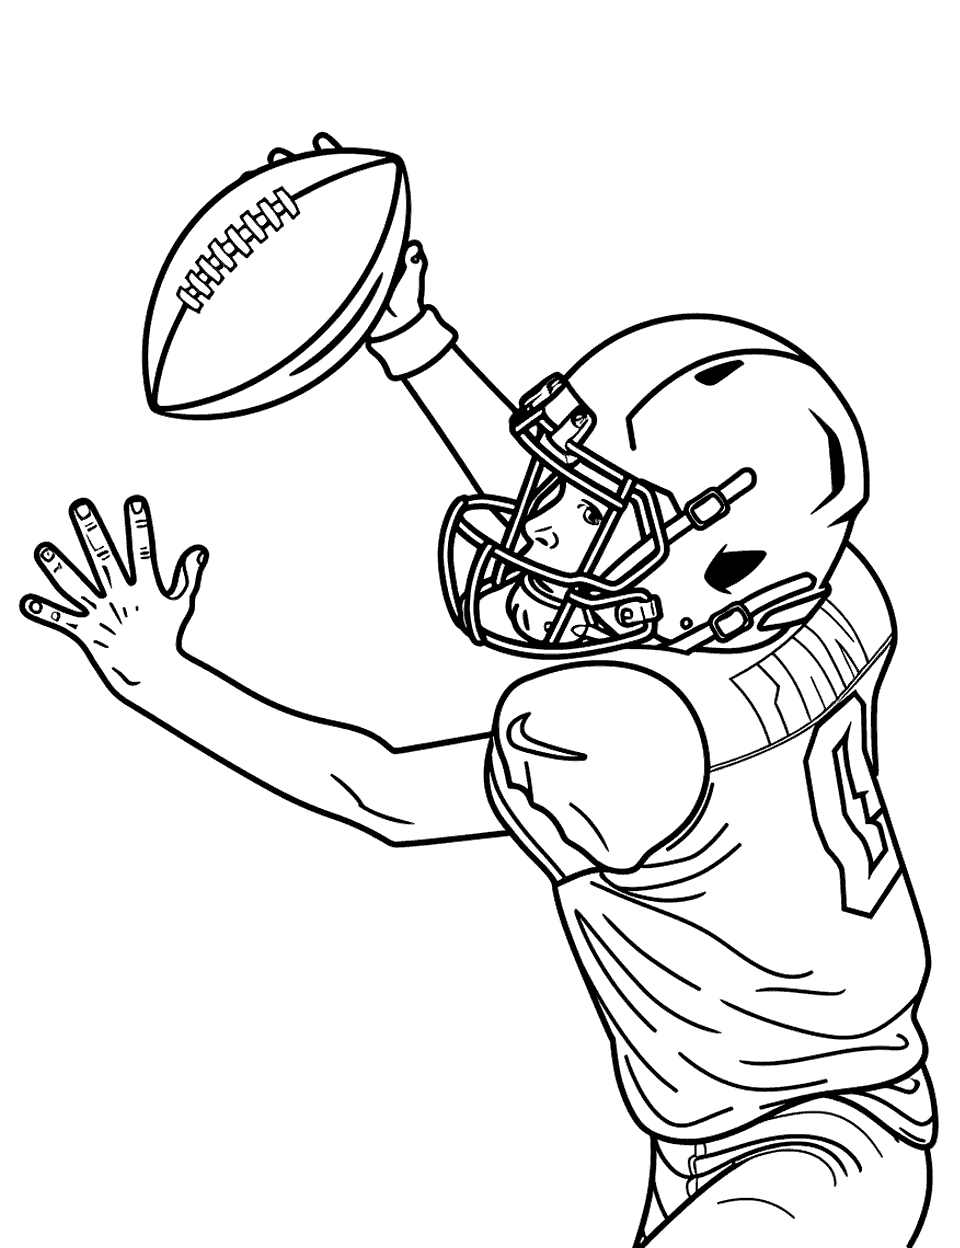 Football Quarterback Action Sports Coloring Page - A quarterback throwing a football.